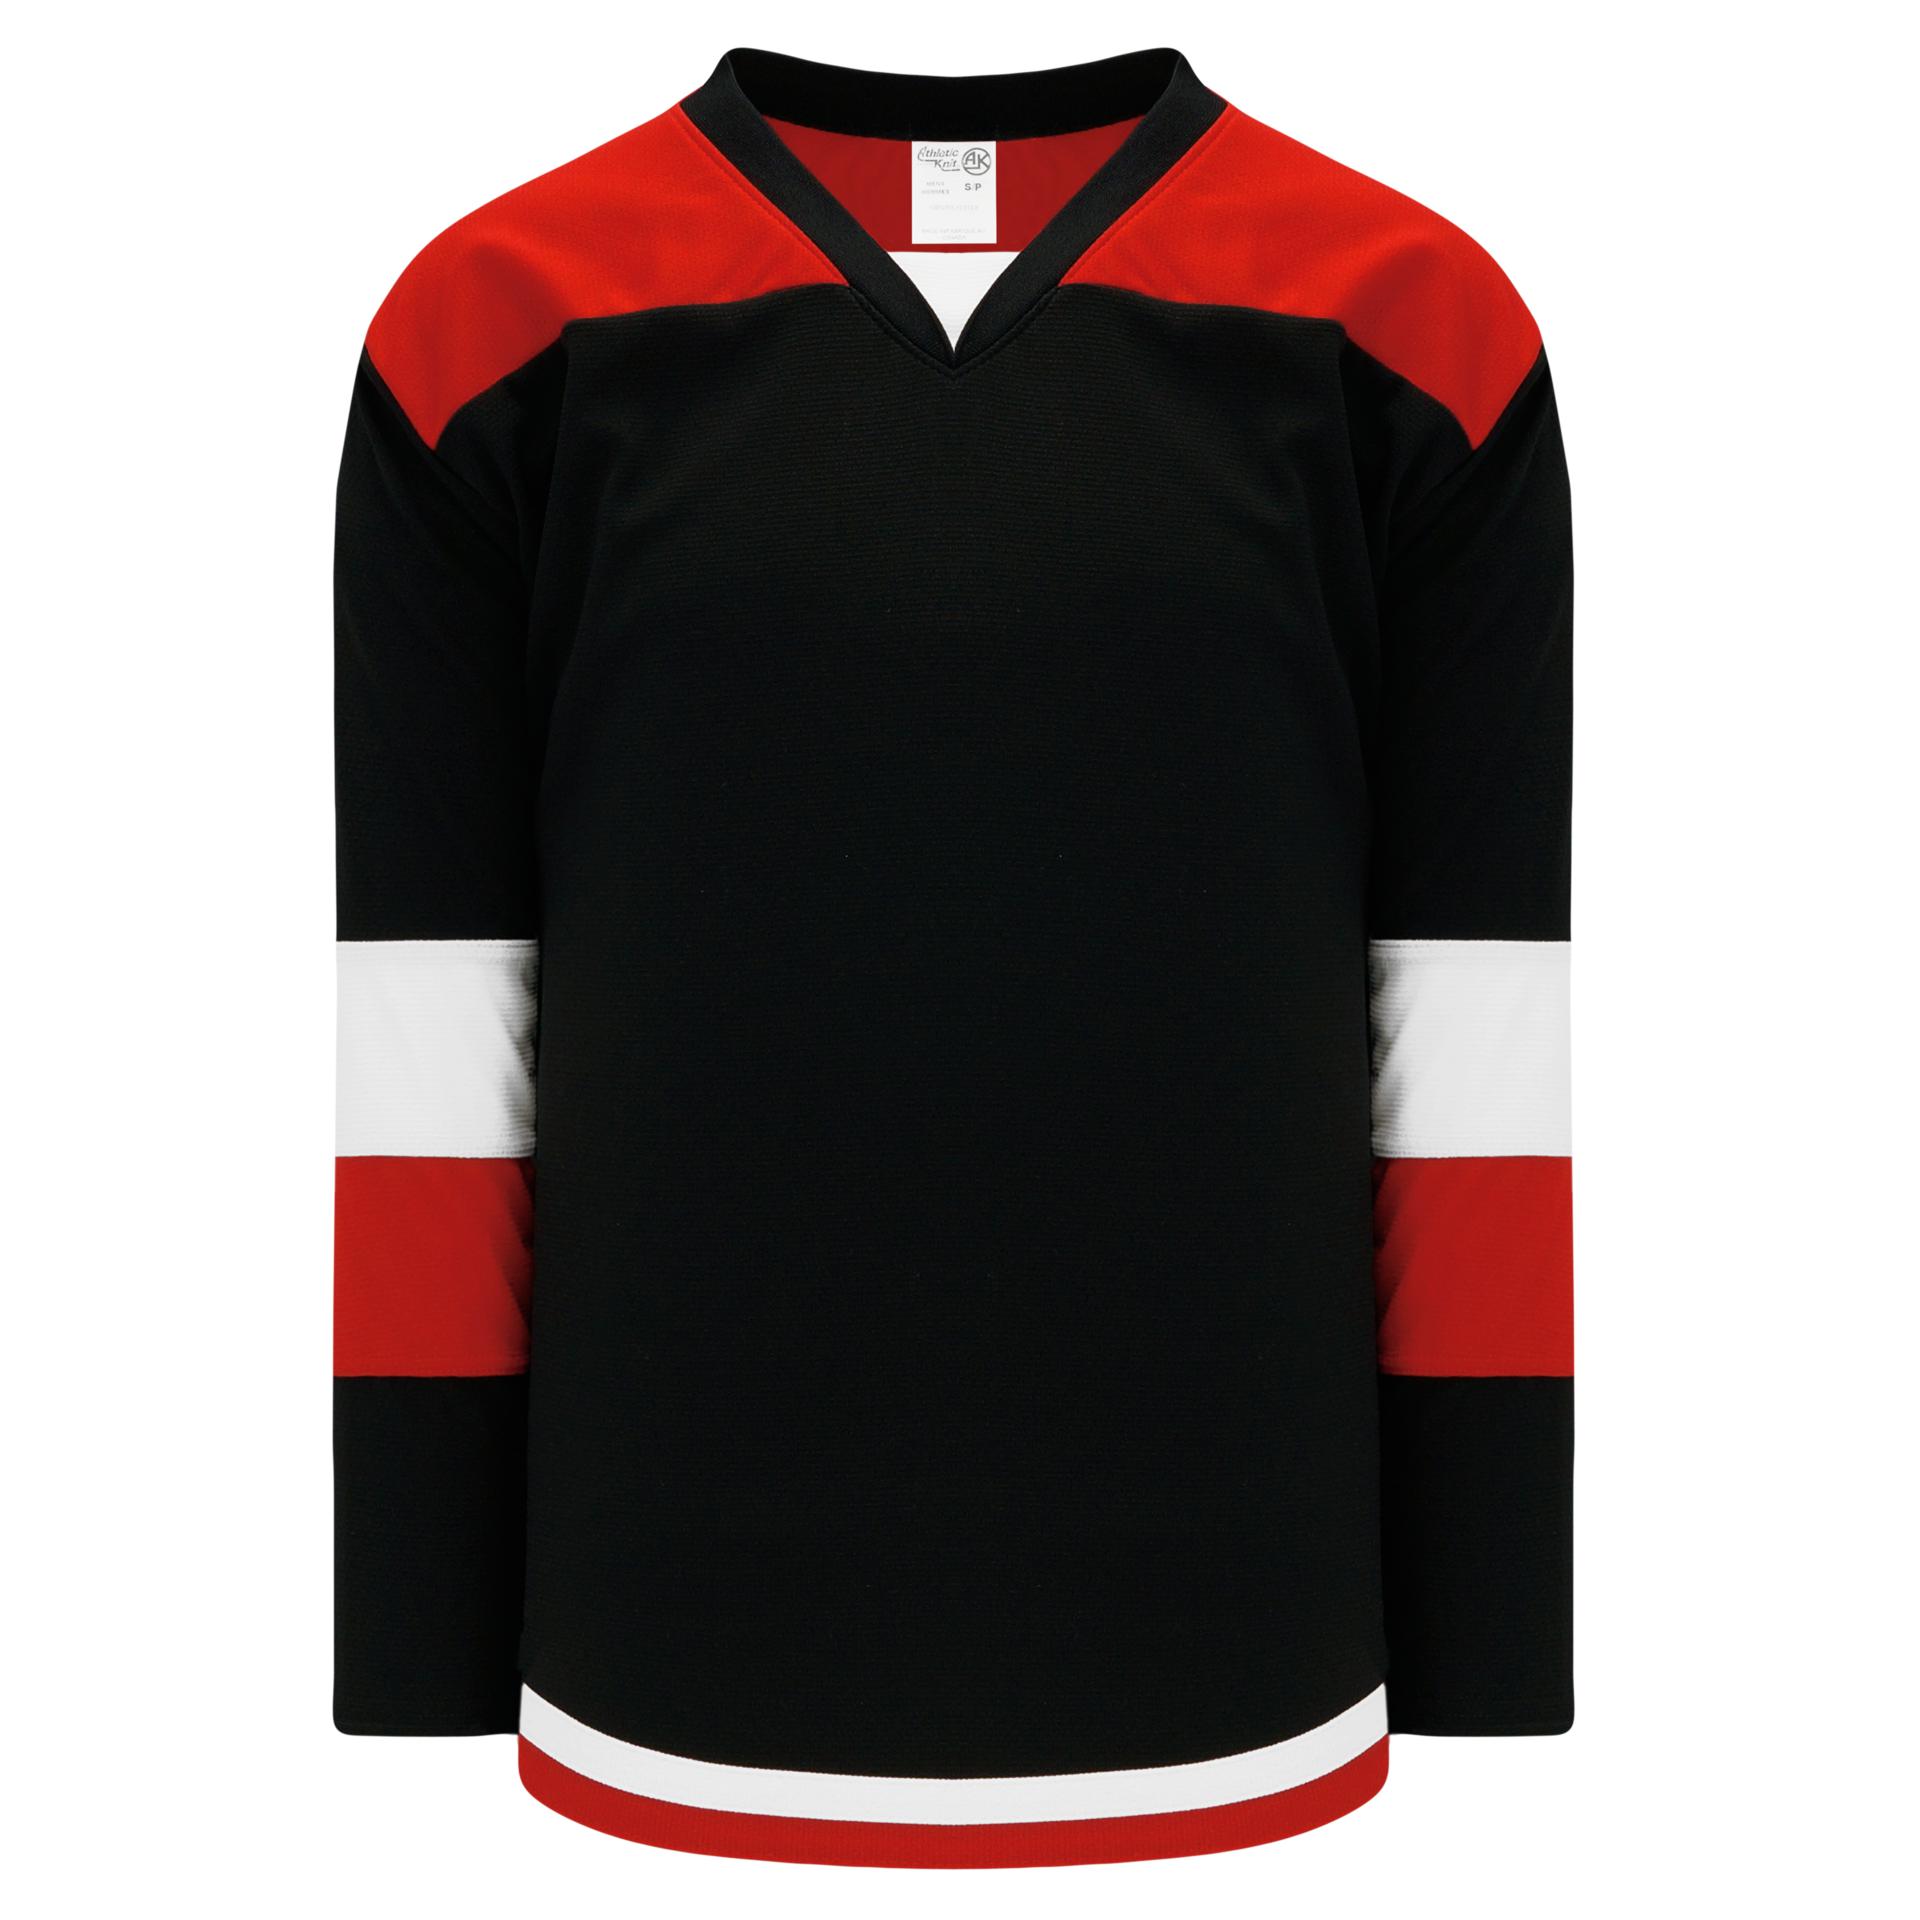 black white and red jersey